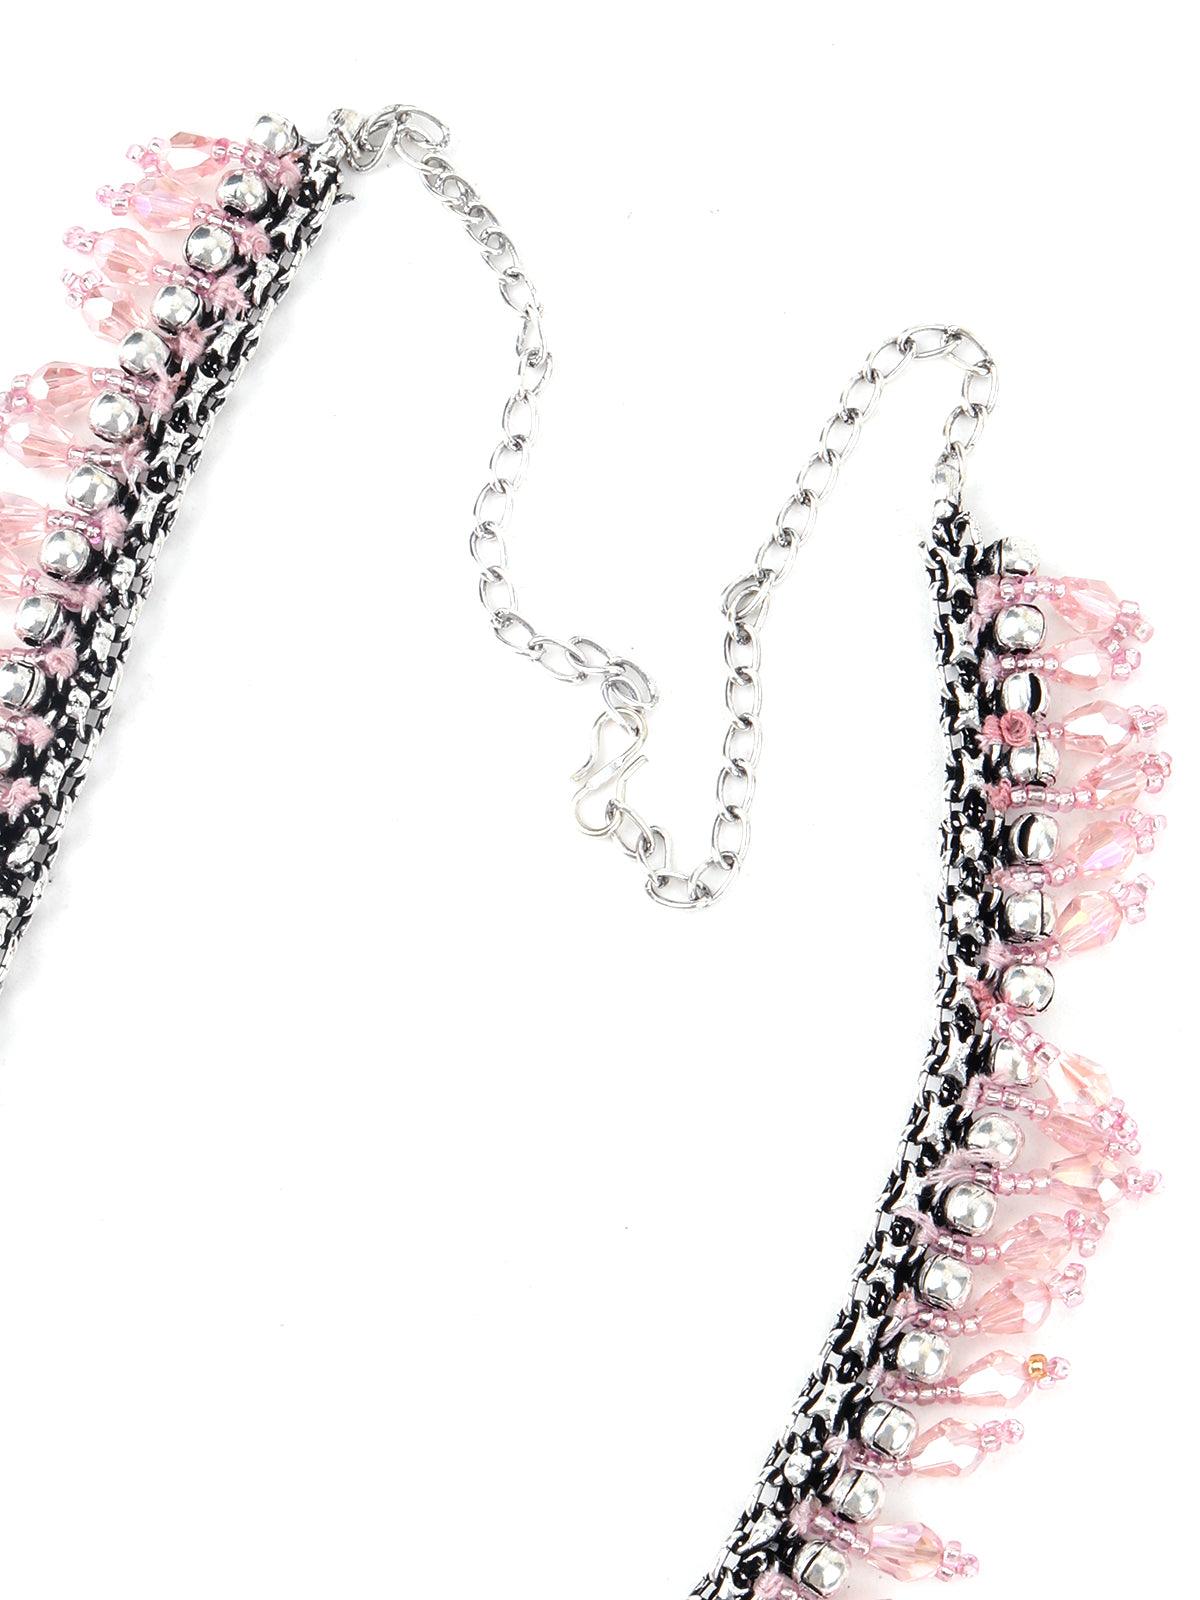 Oxidized Silver and Pink Rhinestones Necklace - Odette